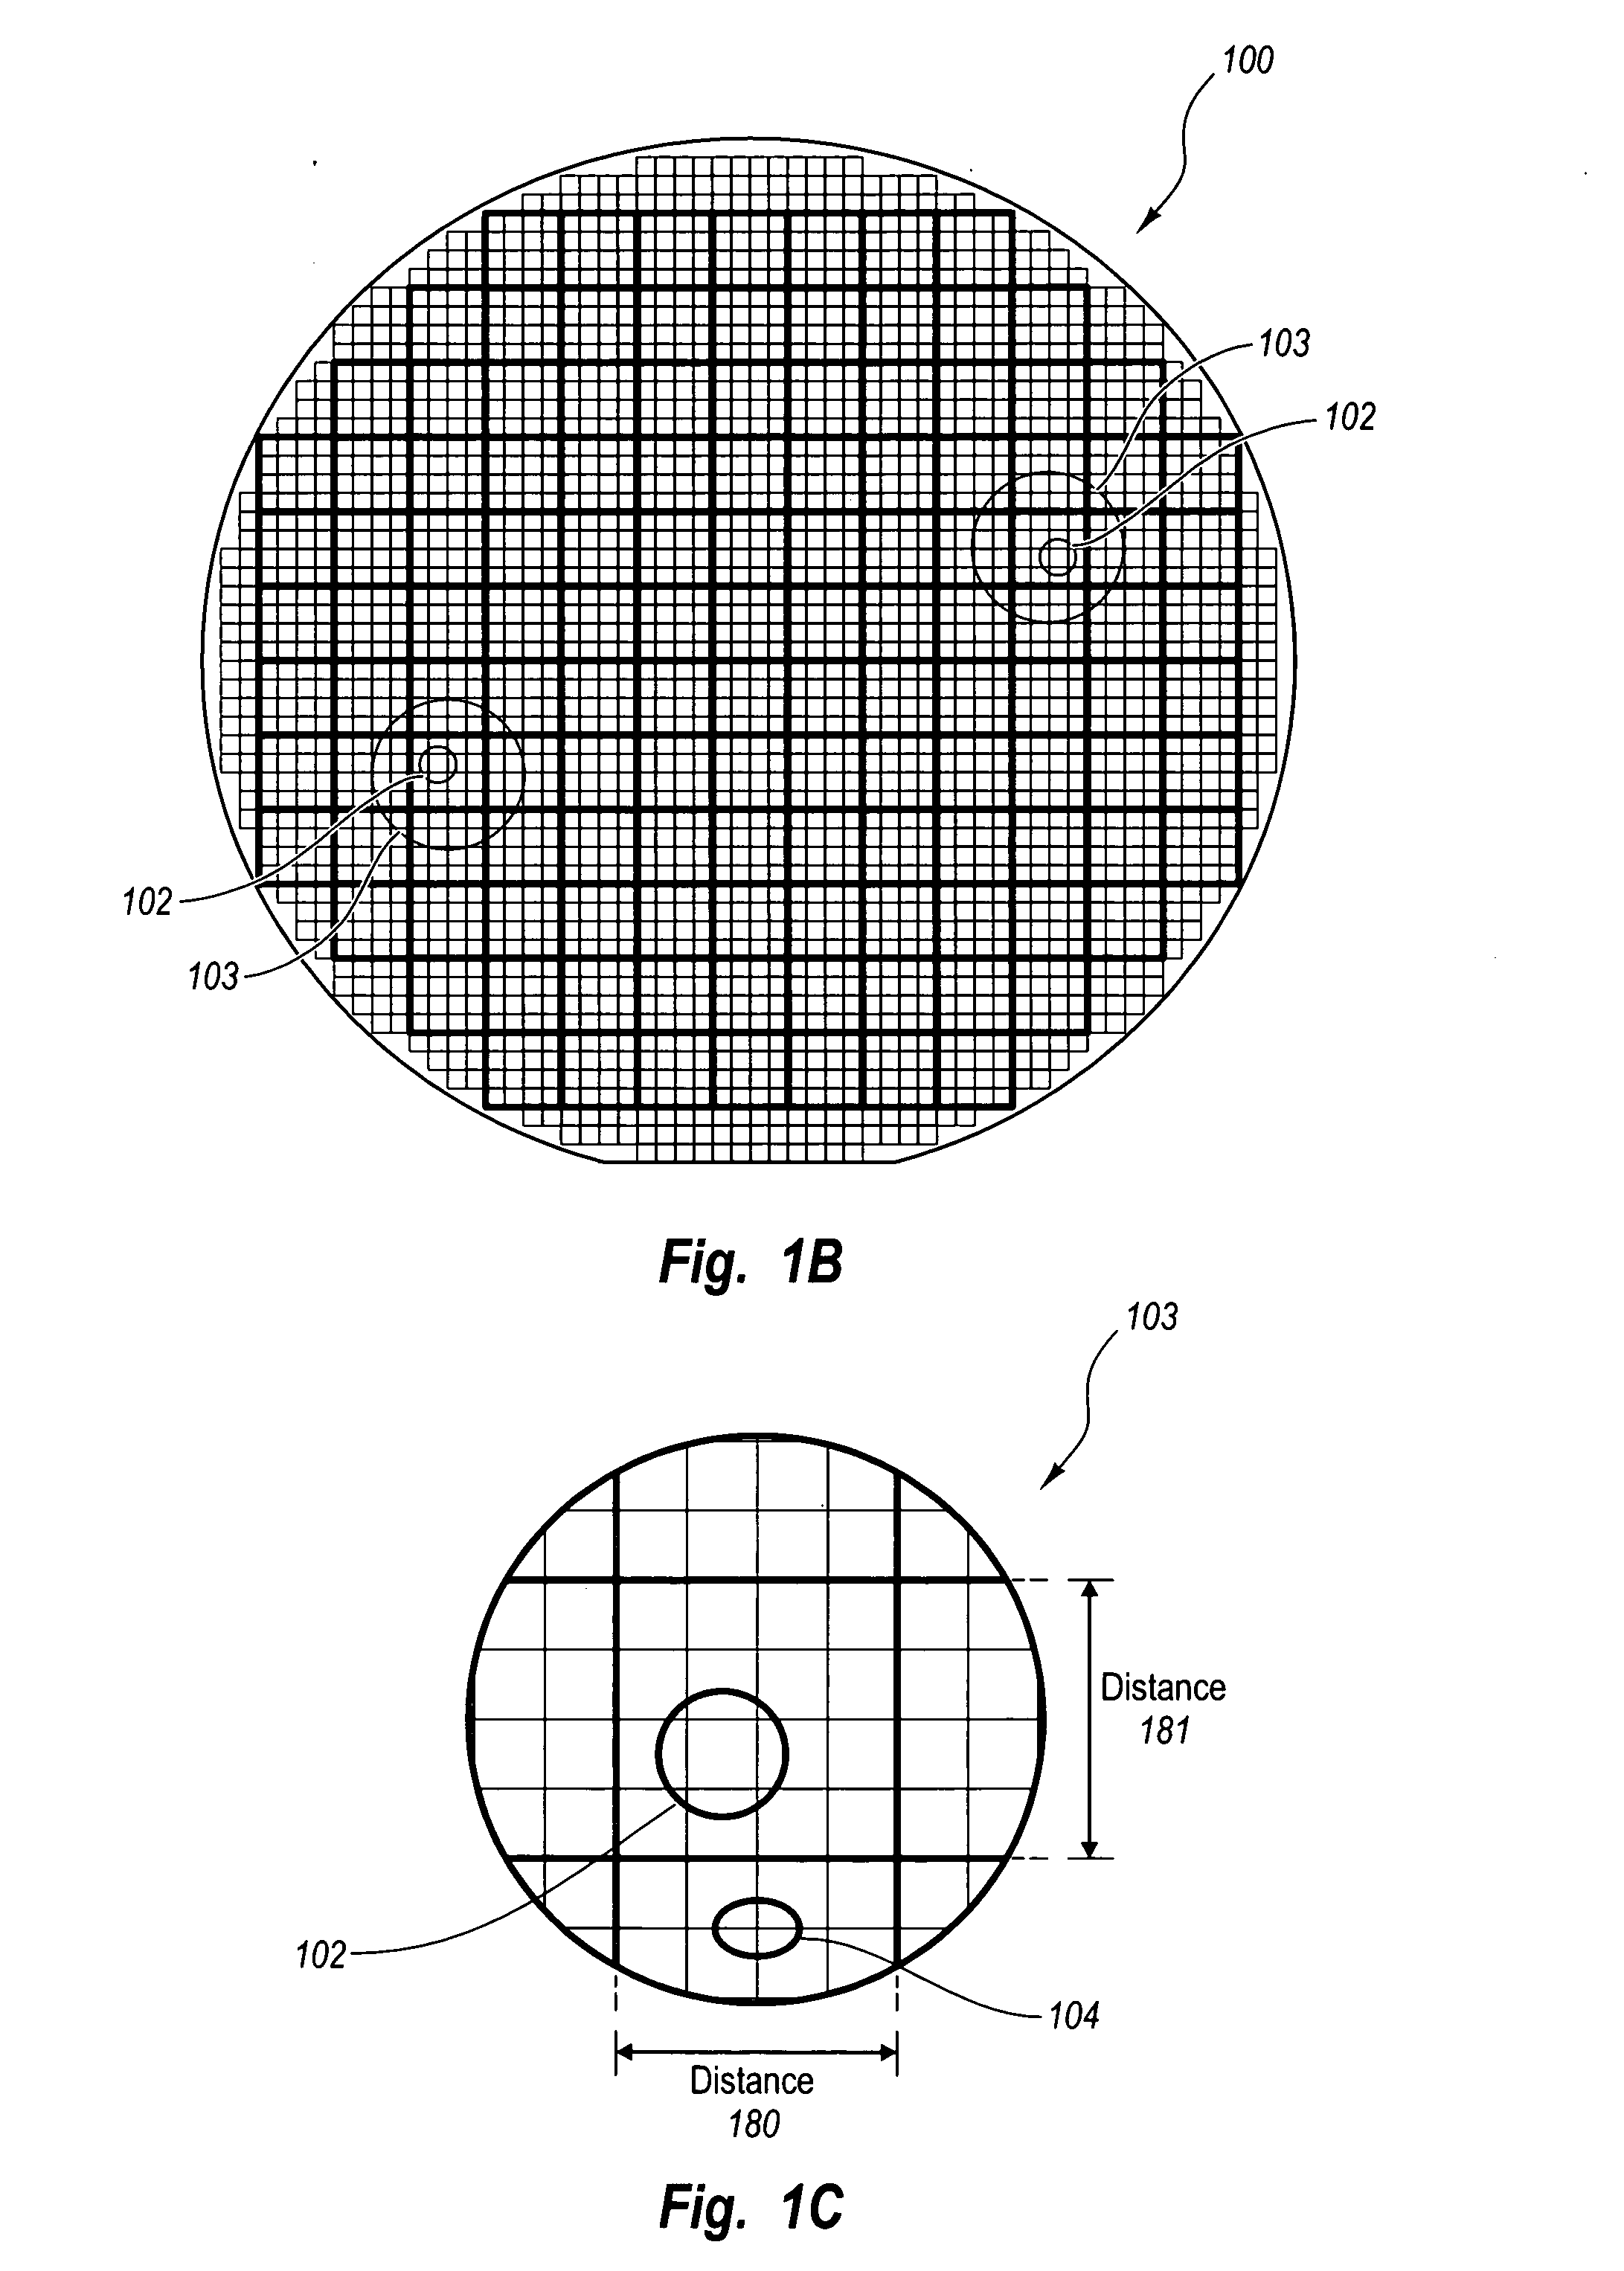 Structured ASIC device with configurable die size and selectable embedded functions